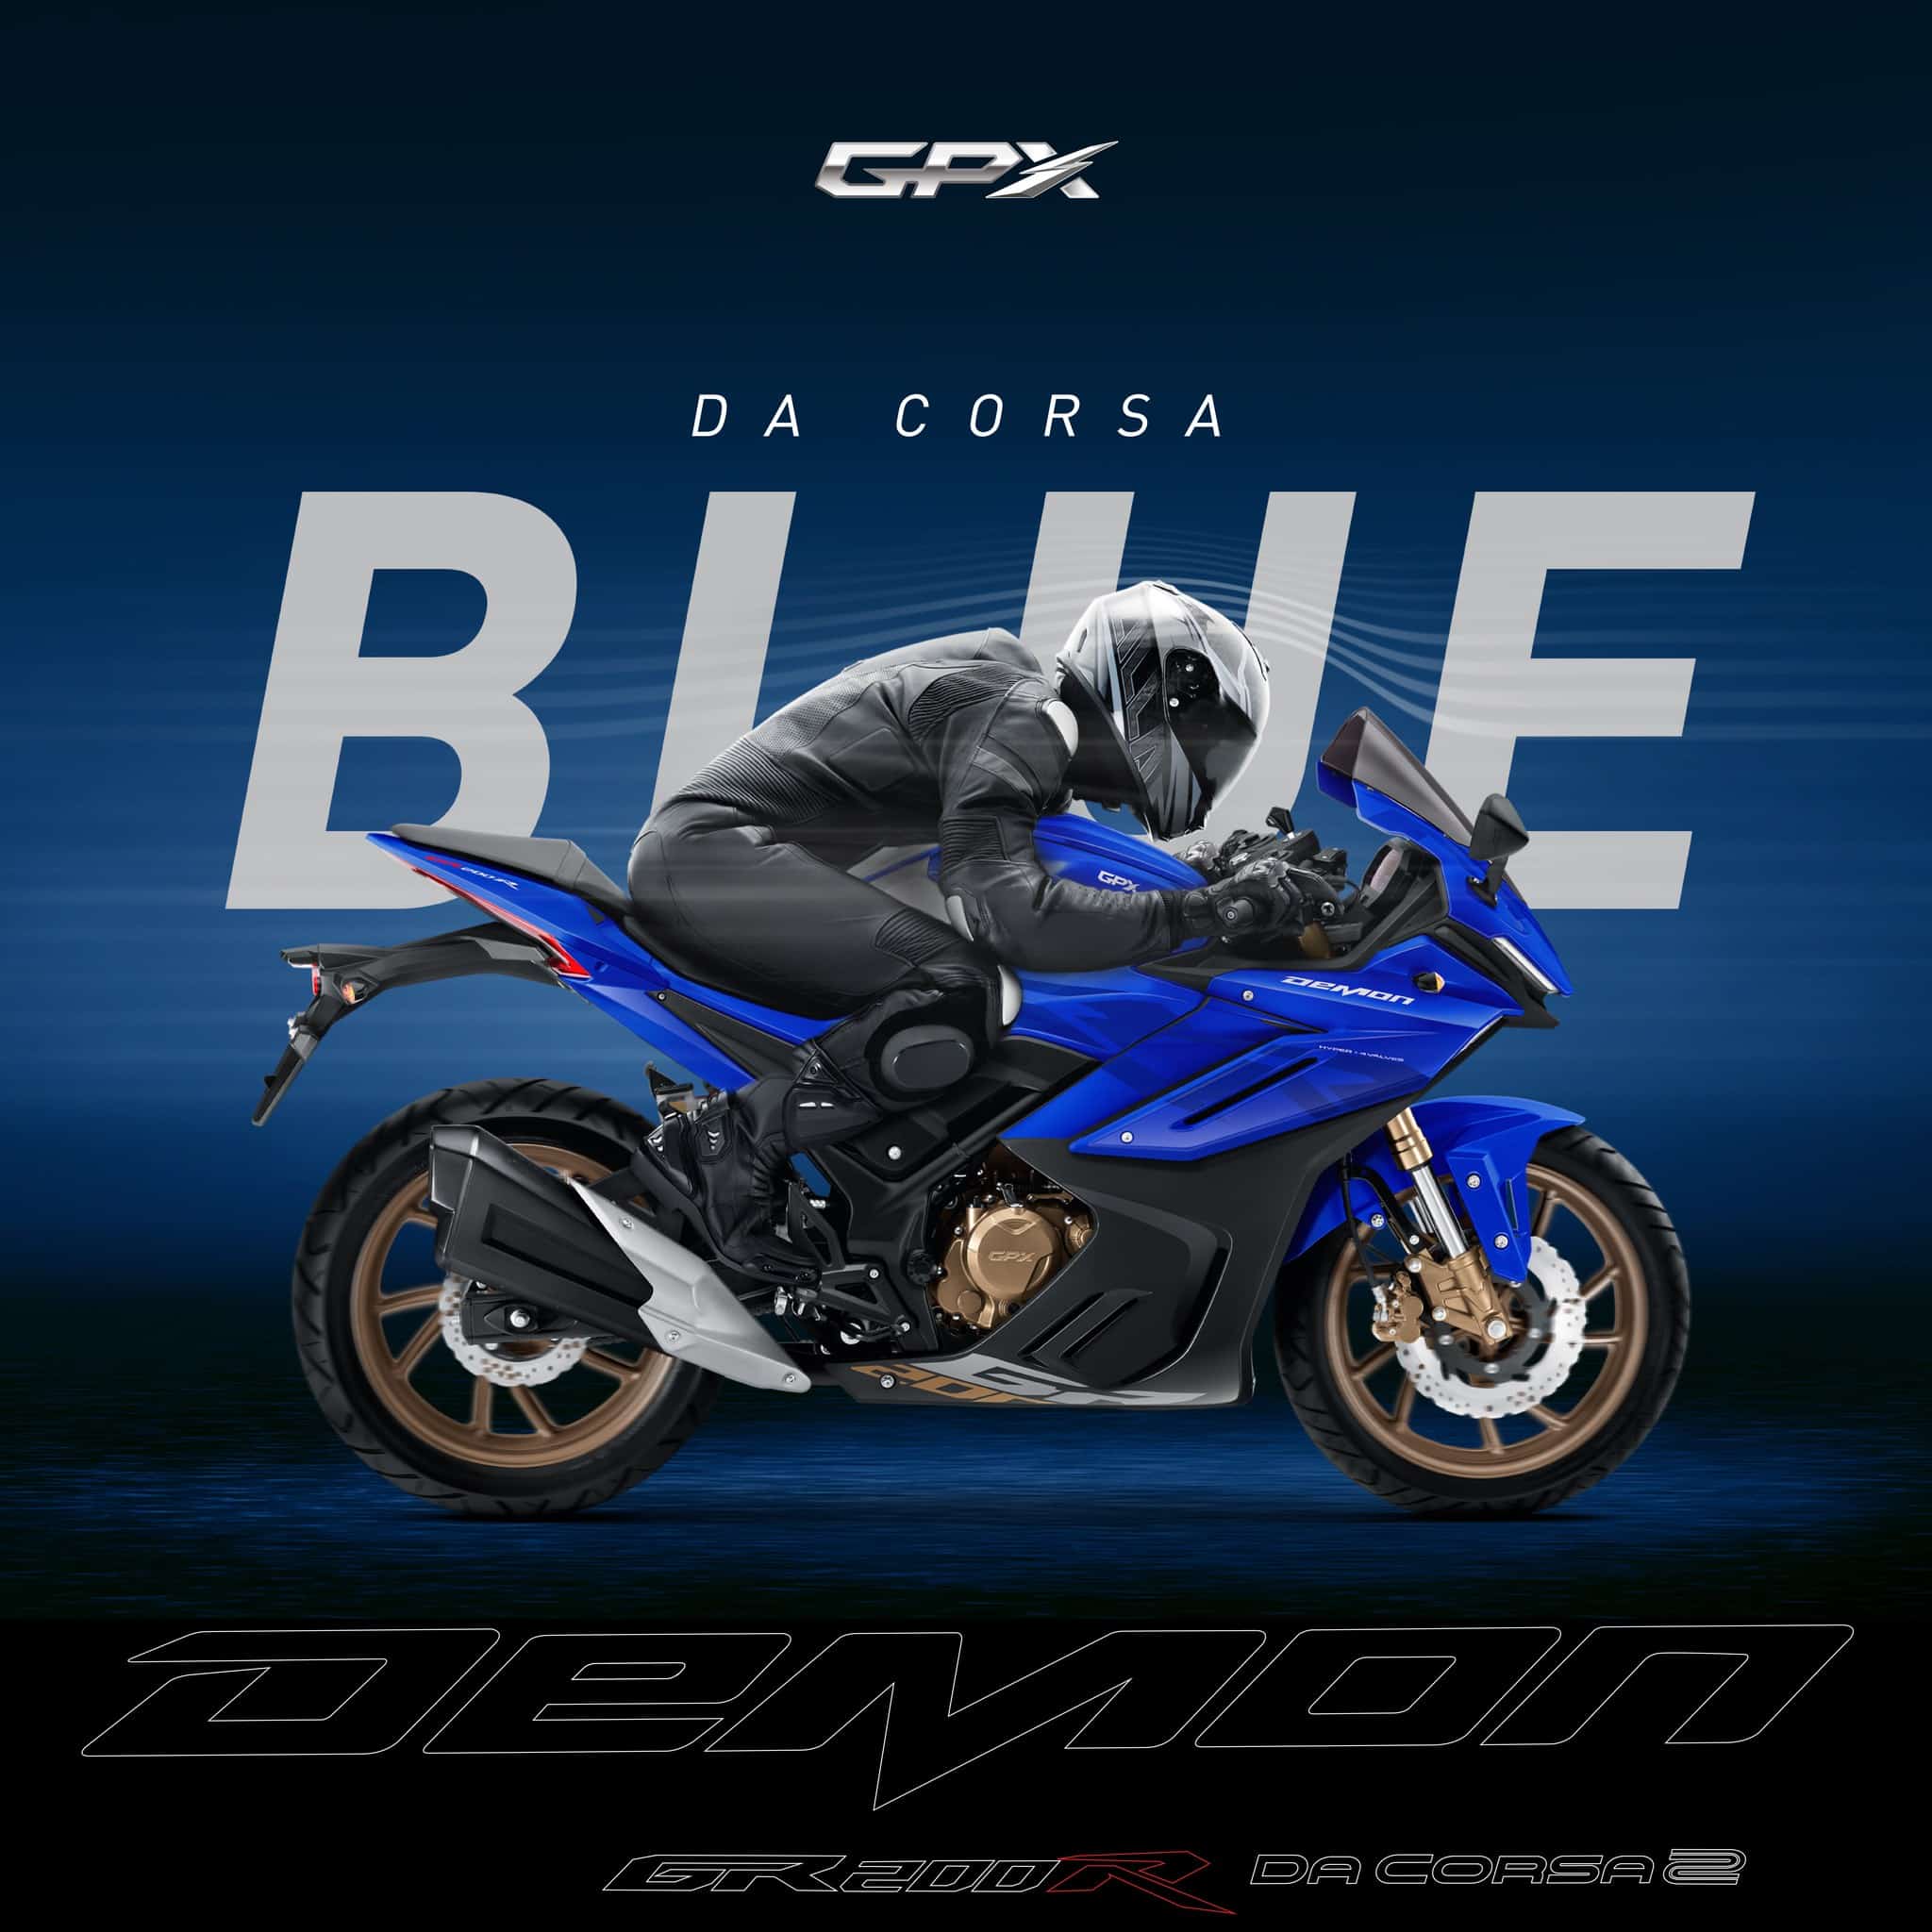 GPX Demon GR200R Da Corsa 2 Makes Official Debut - Price Revealed! - pic